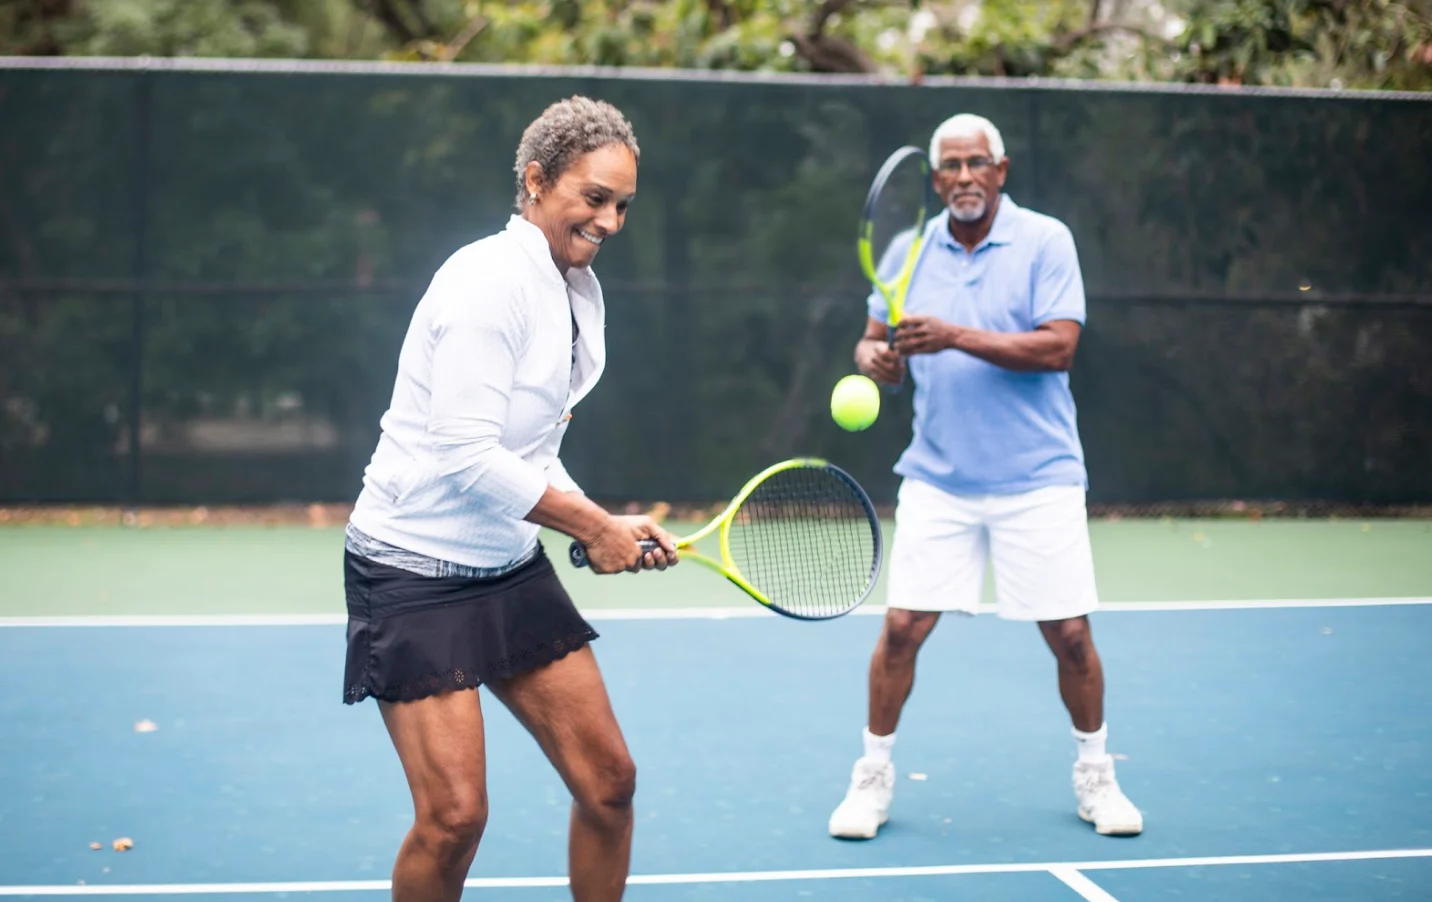 Getty Images: Couples tennis, summer, exercise, sports